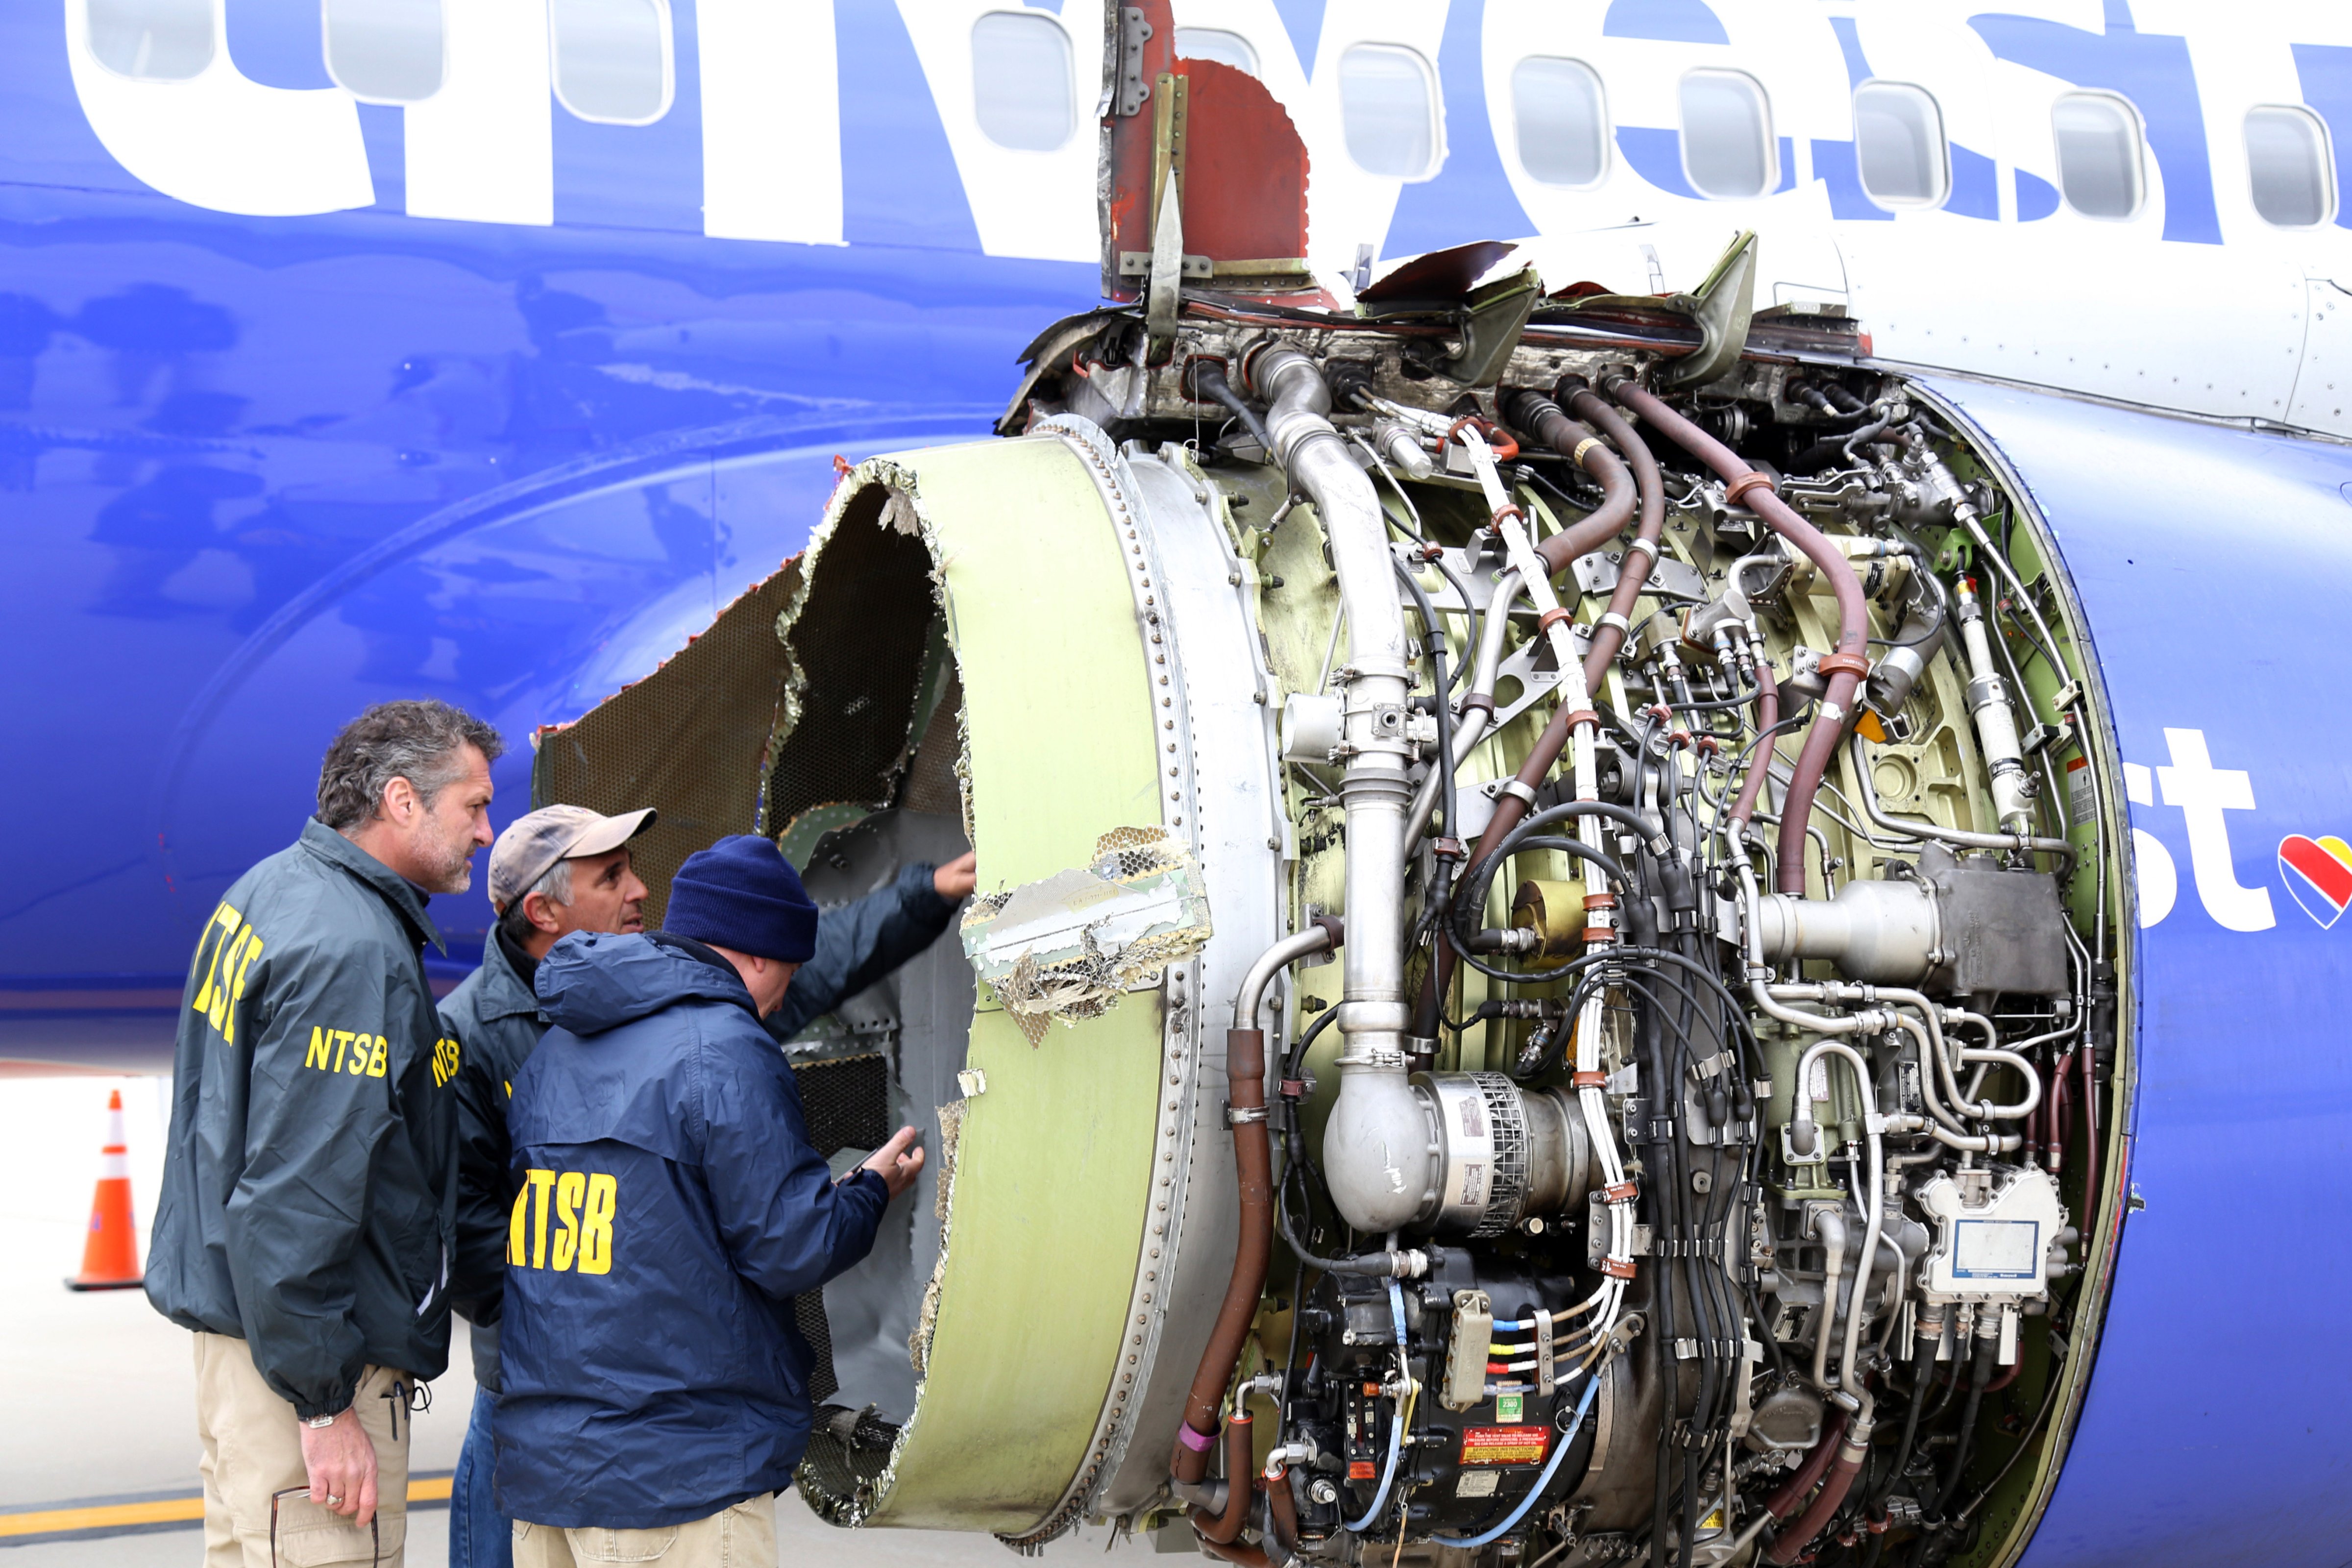 NTSB investigators examine damage to the turbofan engine belonging Southwest Airlines Flight 1380 that separated during flight on April 17, 2018 in Philadelphia, Pennsylvania. (Keith Holloway—National Transportation Safety Board Handout/Getty Images)